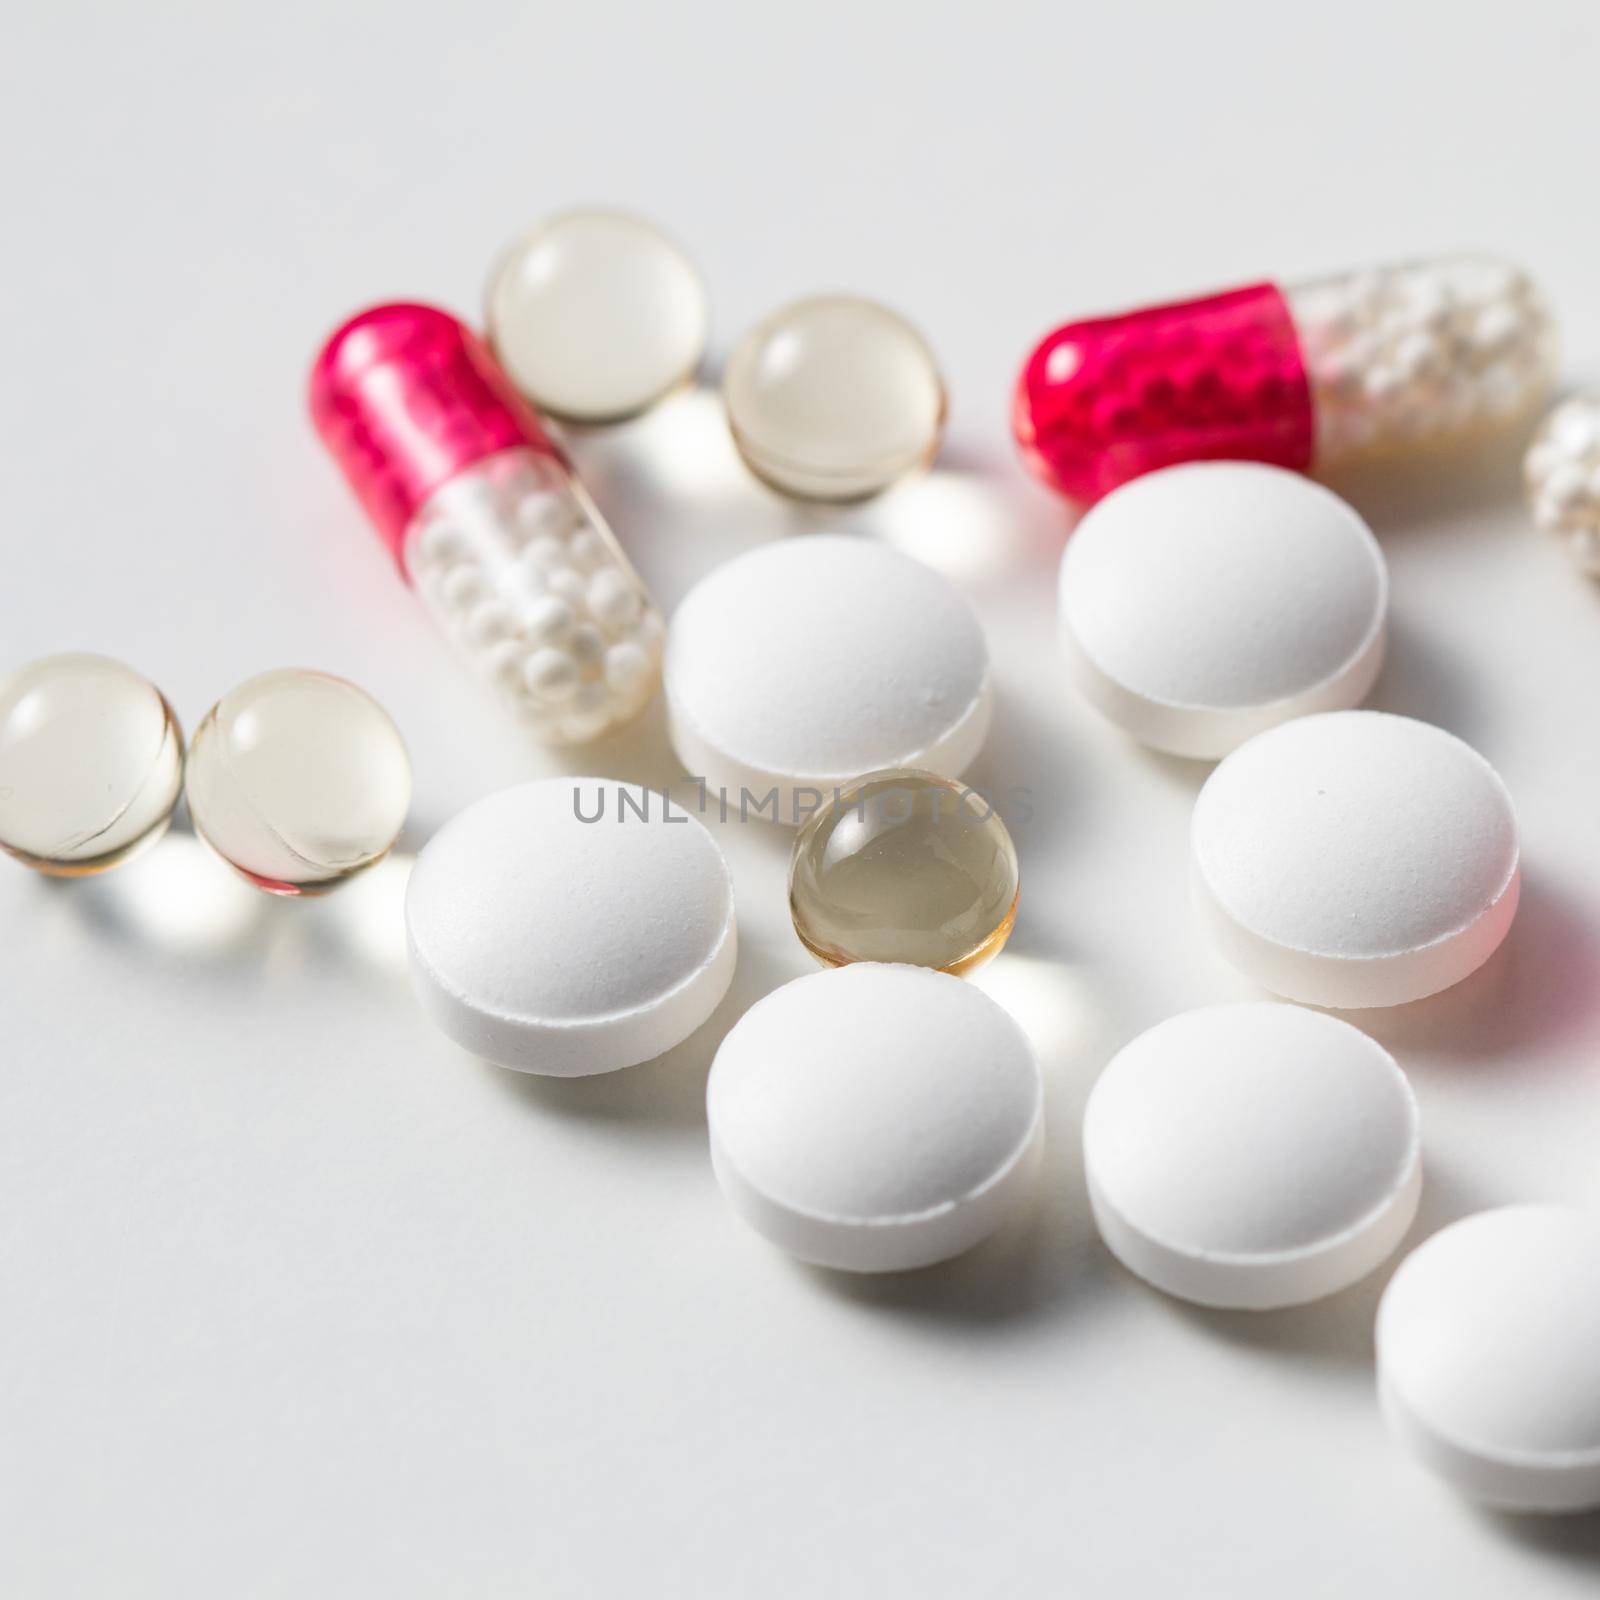 Red capsules and pills on a white background. Health care, medical, pharmacy and illness concept